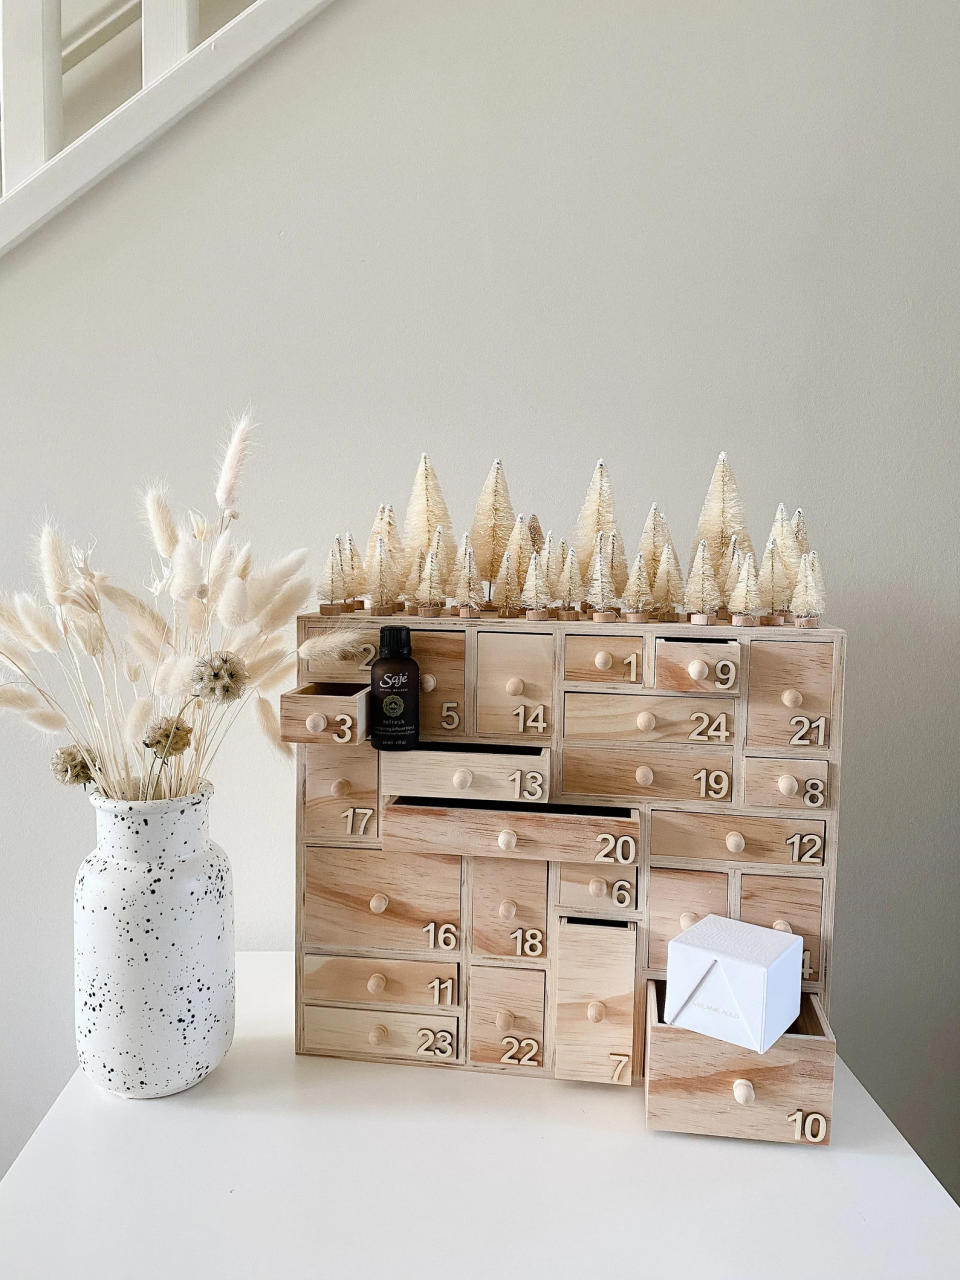 the Handcrafted Wooden Advent Calendar on a surface beside a vase with dried plants